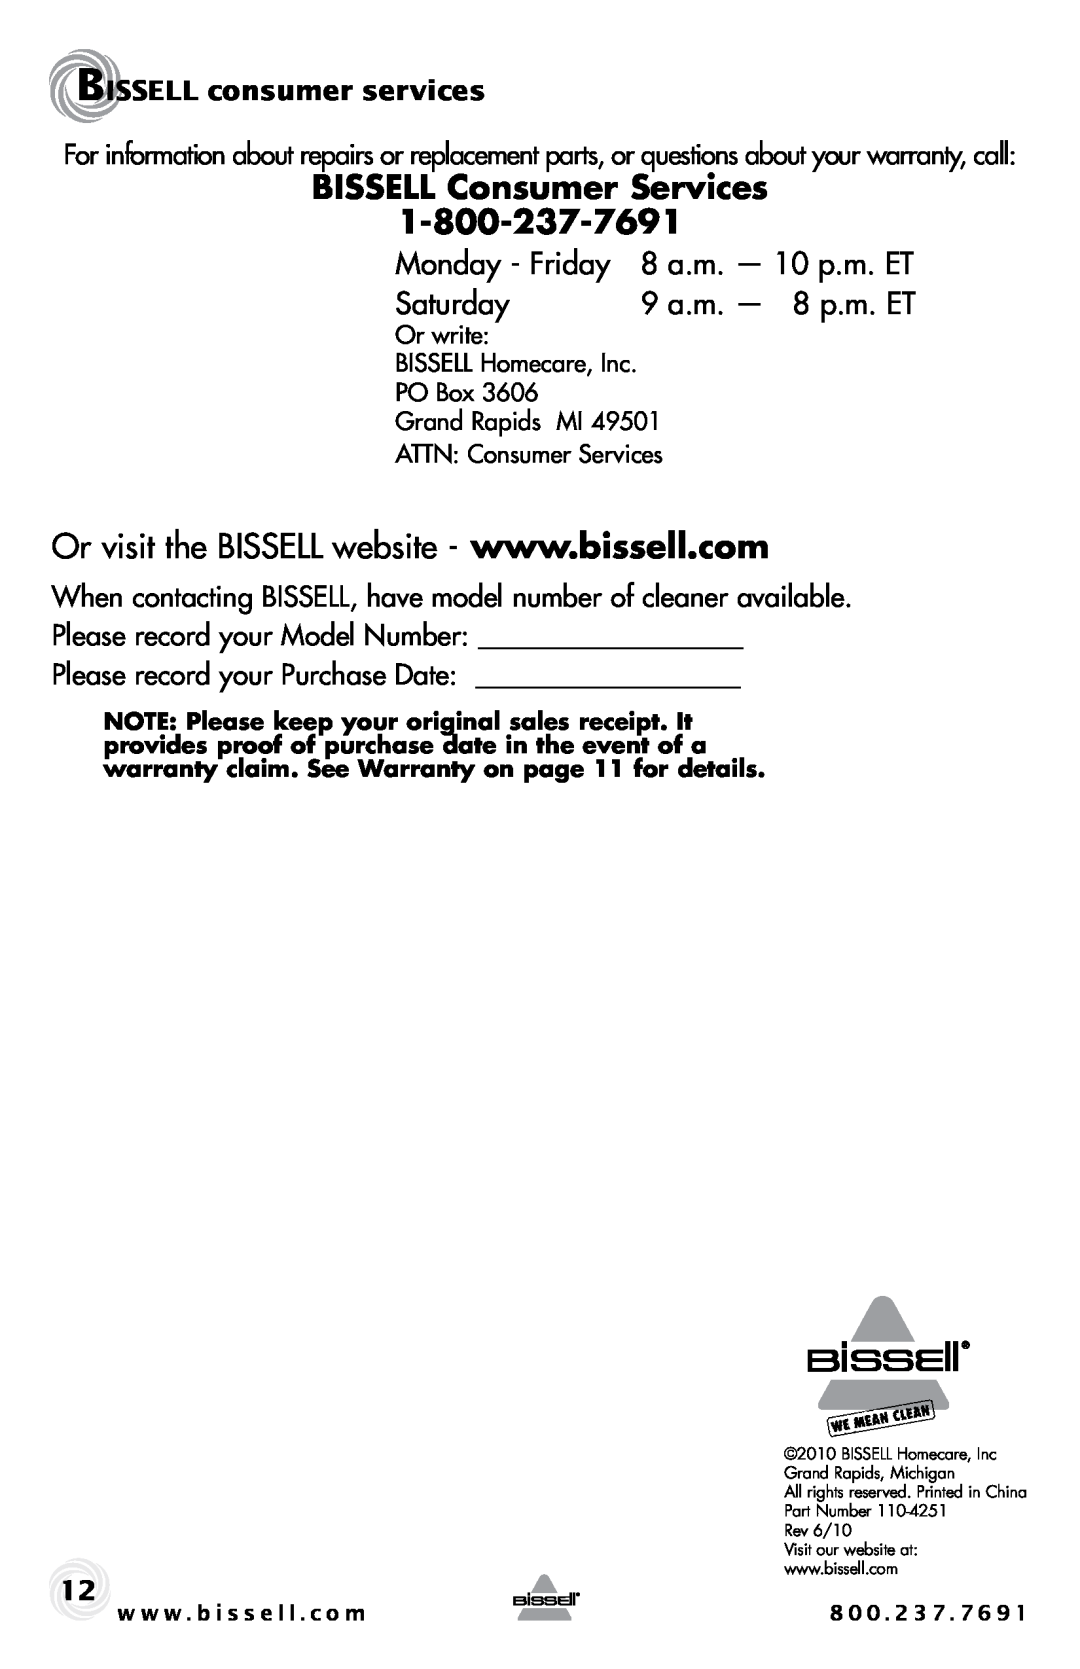 Bissell 81L2T BISSELL Consumer Services, Monday - Friday, Saturday, 9 a.m. - 8 p.m. ET, 8 a.m. - 10 p.m. ET, Or write 